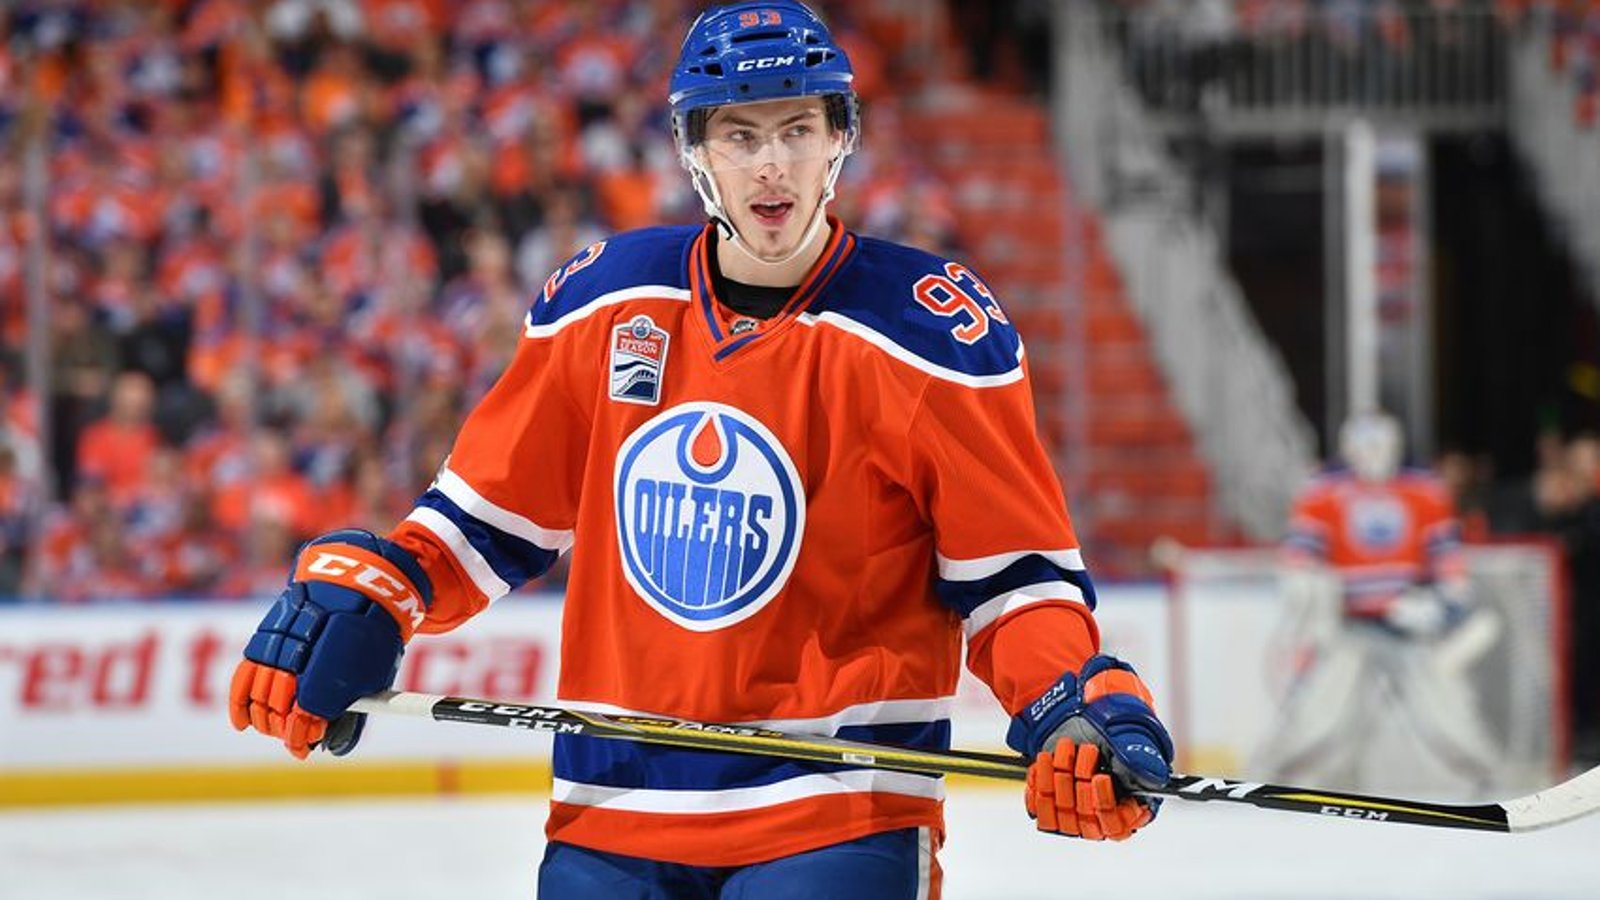 Oilers to trade Nugent-Hopkins for jaw-dropping offer?!